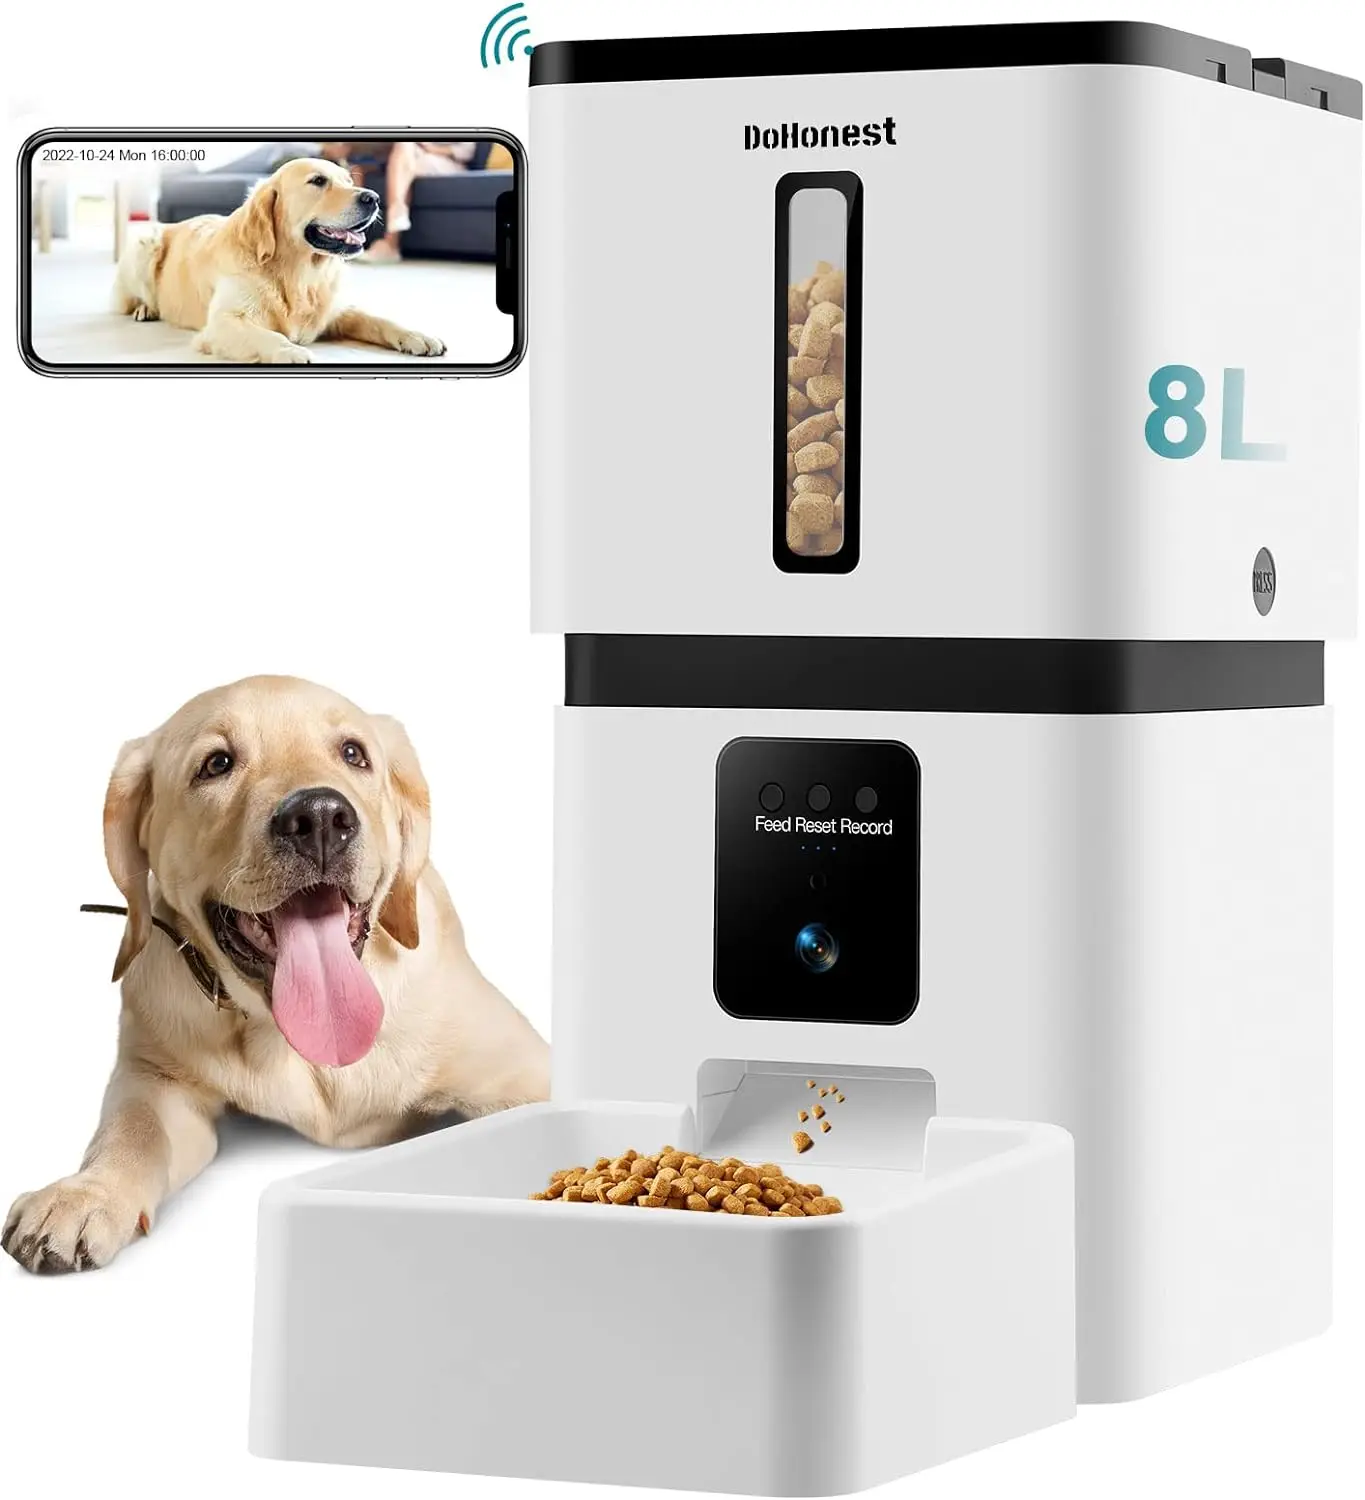 

DoHonest Automatic Dog Feeder with Camera: 5G WiFi Easy Setup 8L Motion Detection Smart Cat Food Dispenser 1080P HD Video Record